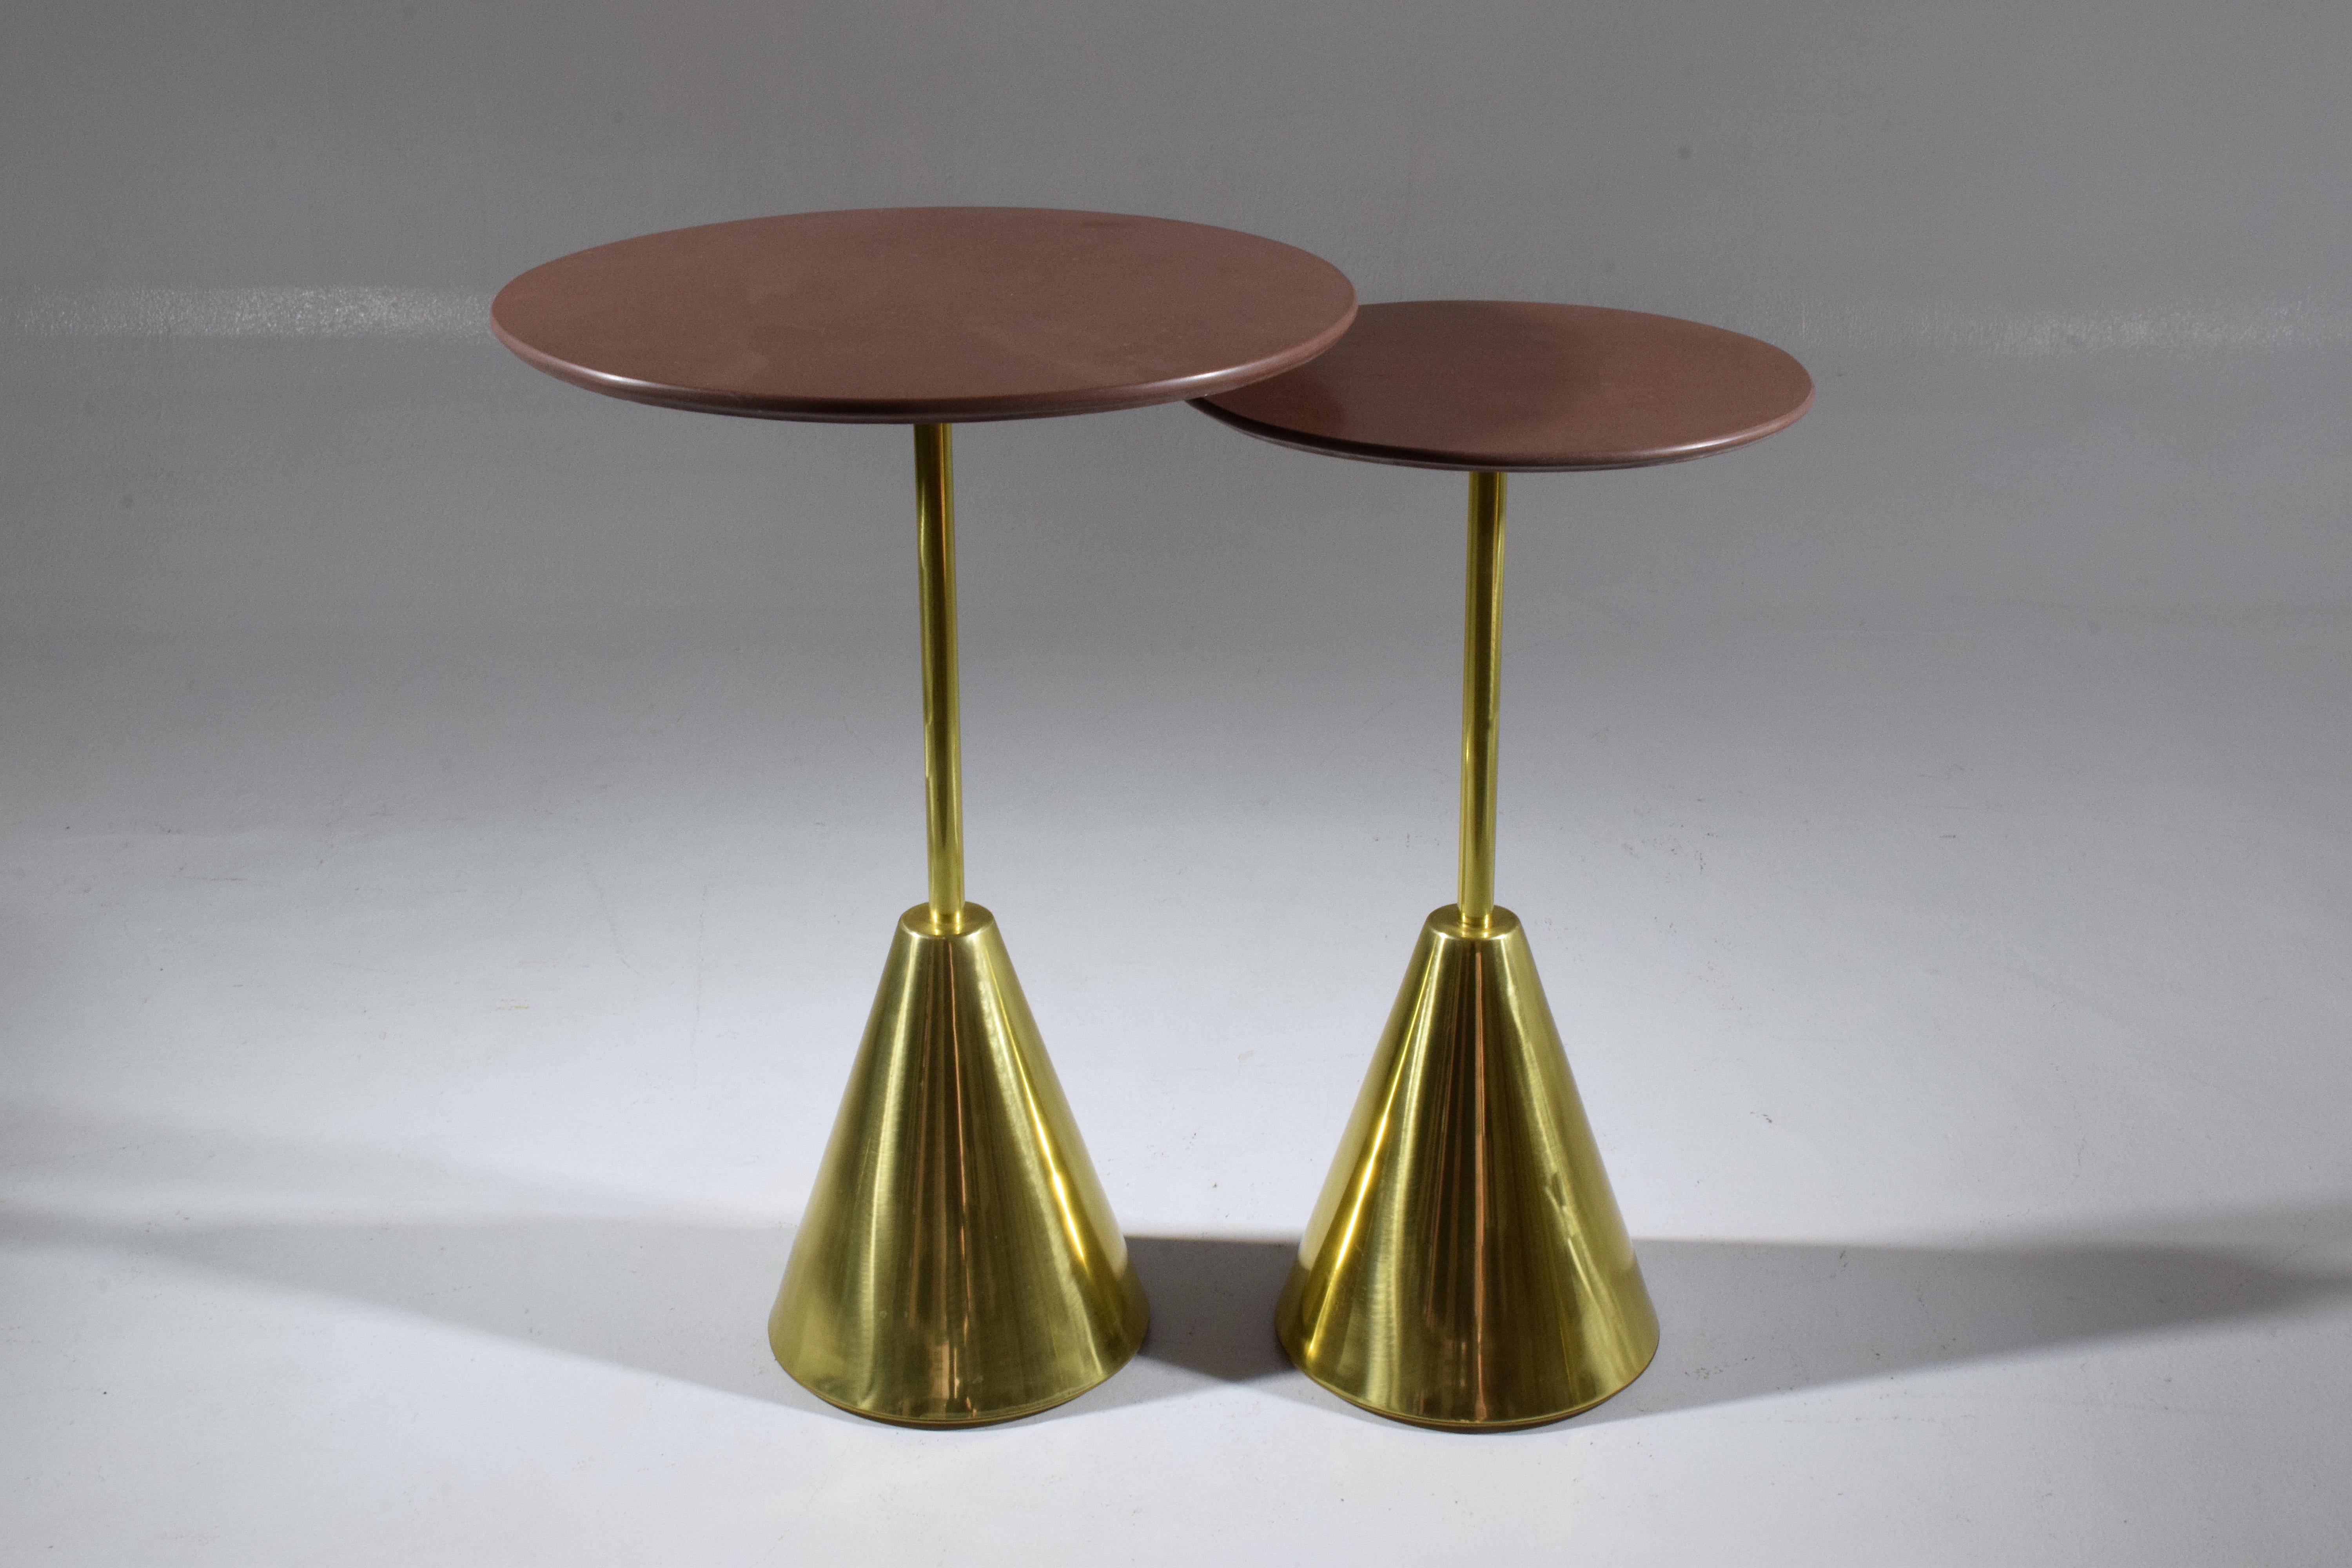 Modern Stone-R Contemporary Handcrafted Brass Side Table, Flow Collection